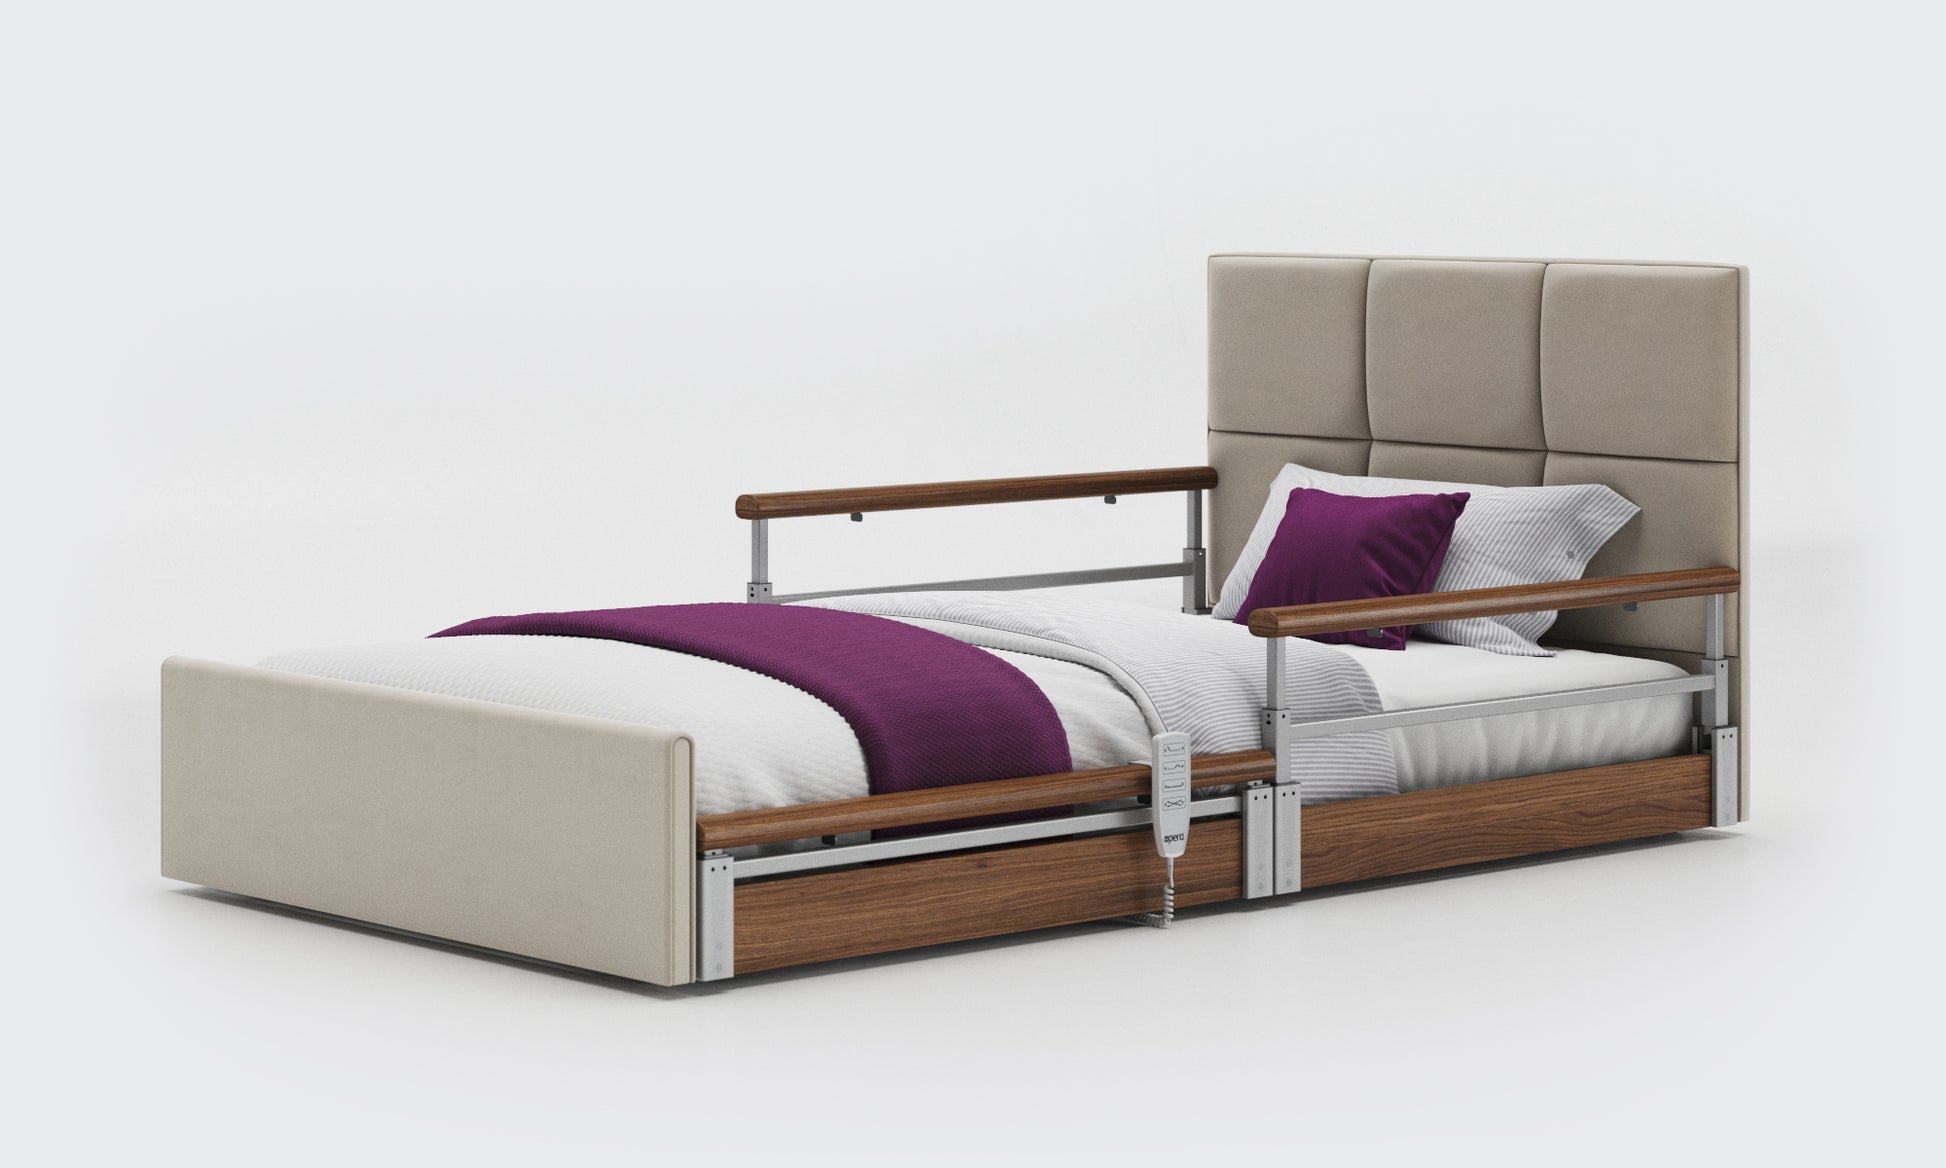 solo comfort plus bed in 3ft6 with walnut split rails and a opal headboard in sisal leather